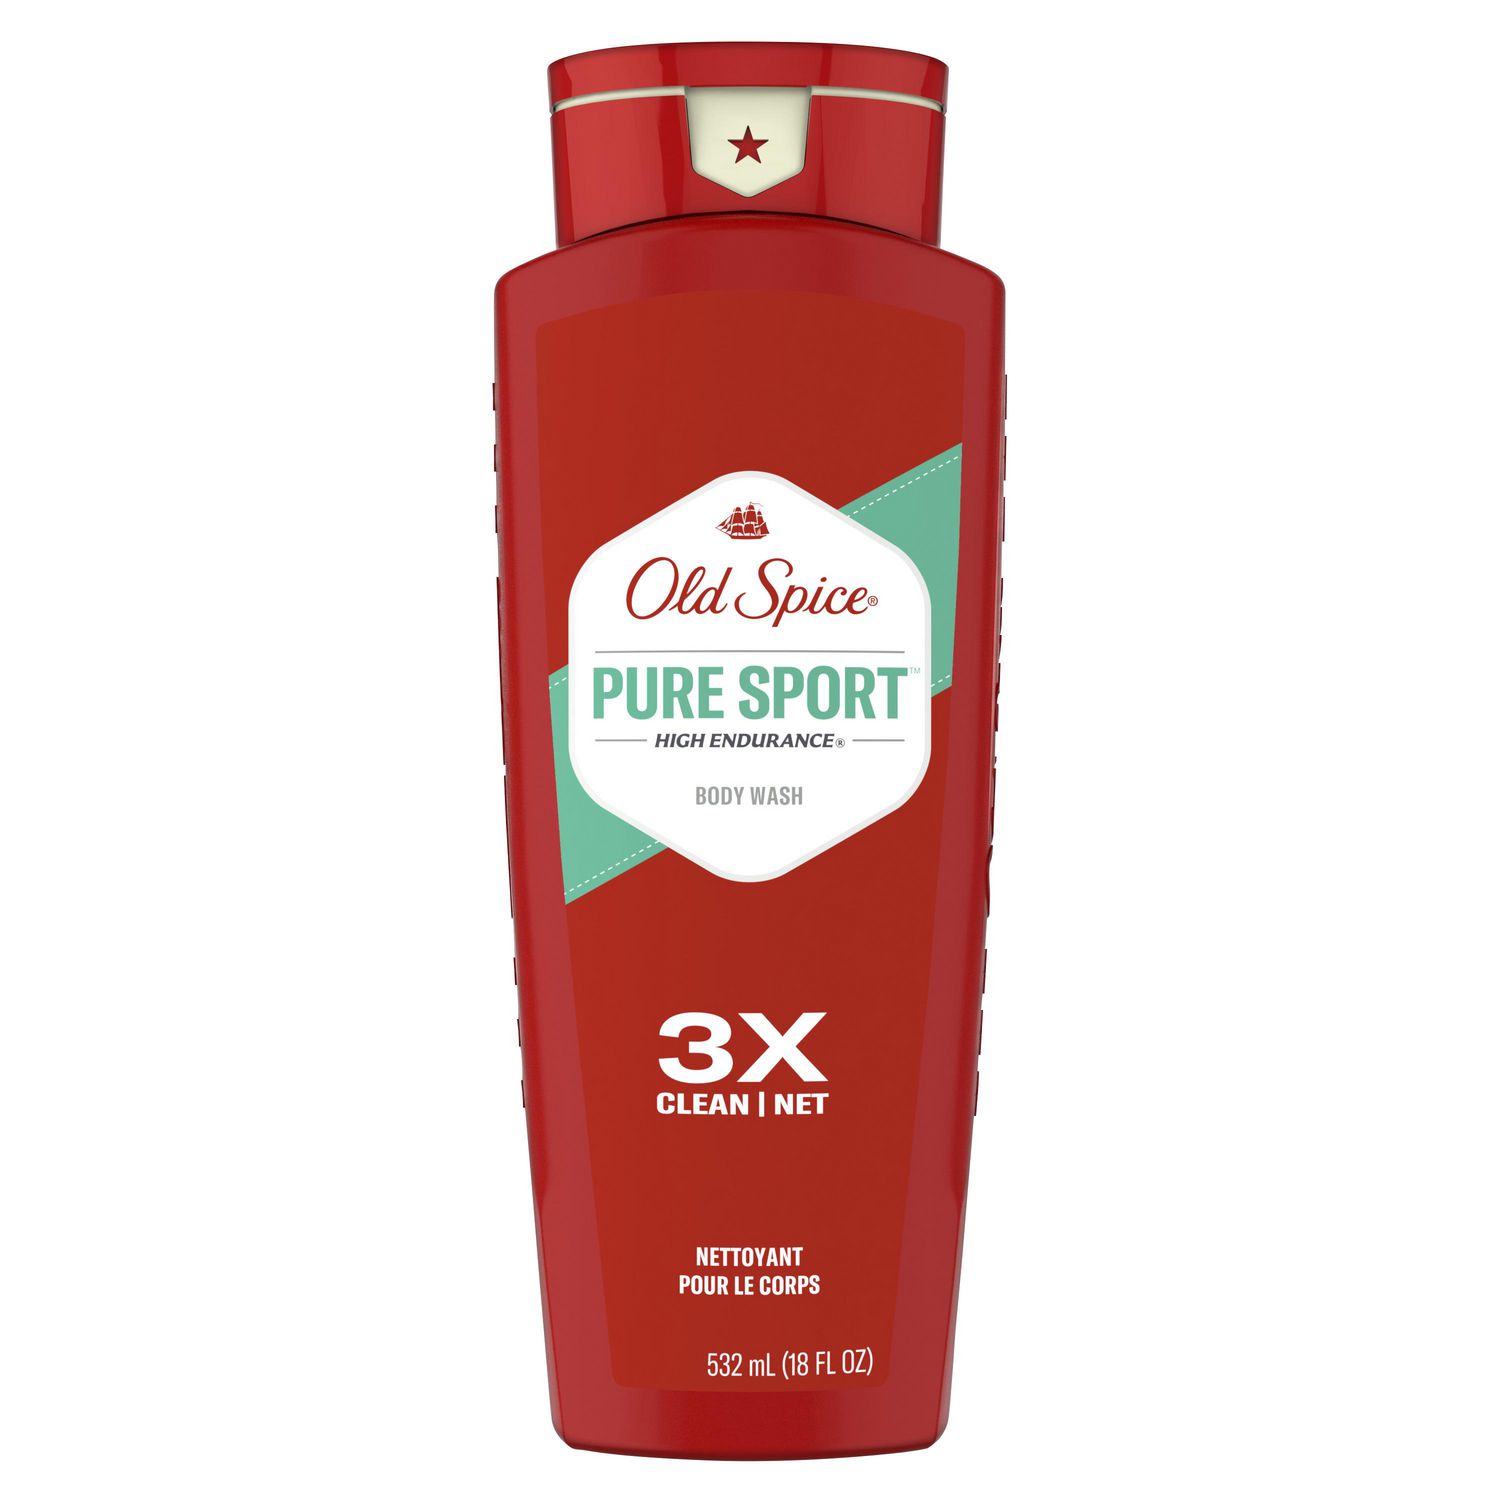 Old Spice High Endurance Pure Sport Scent Body Wash for MEN | Walmart